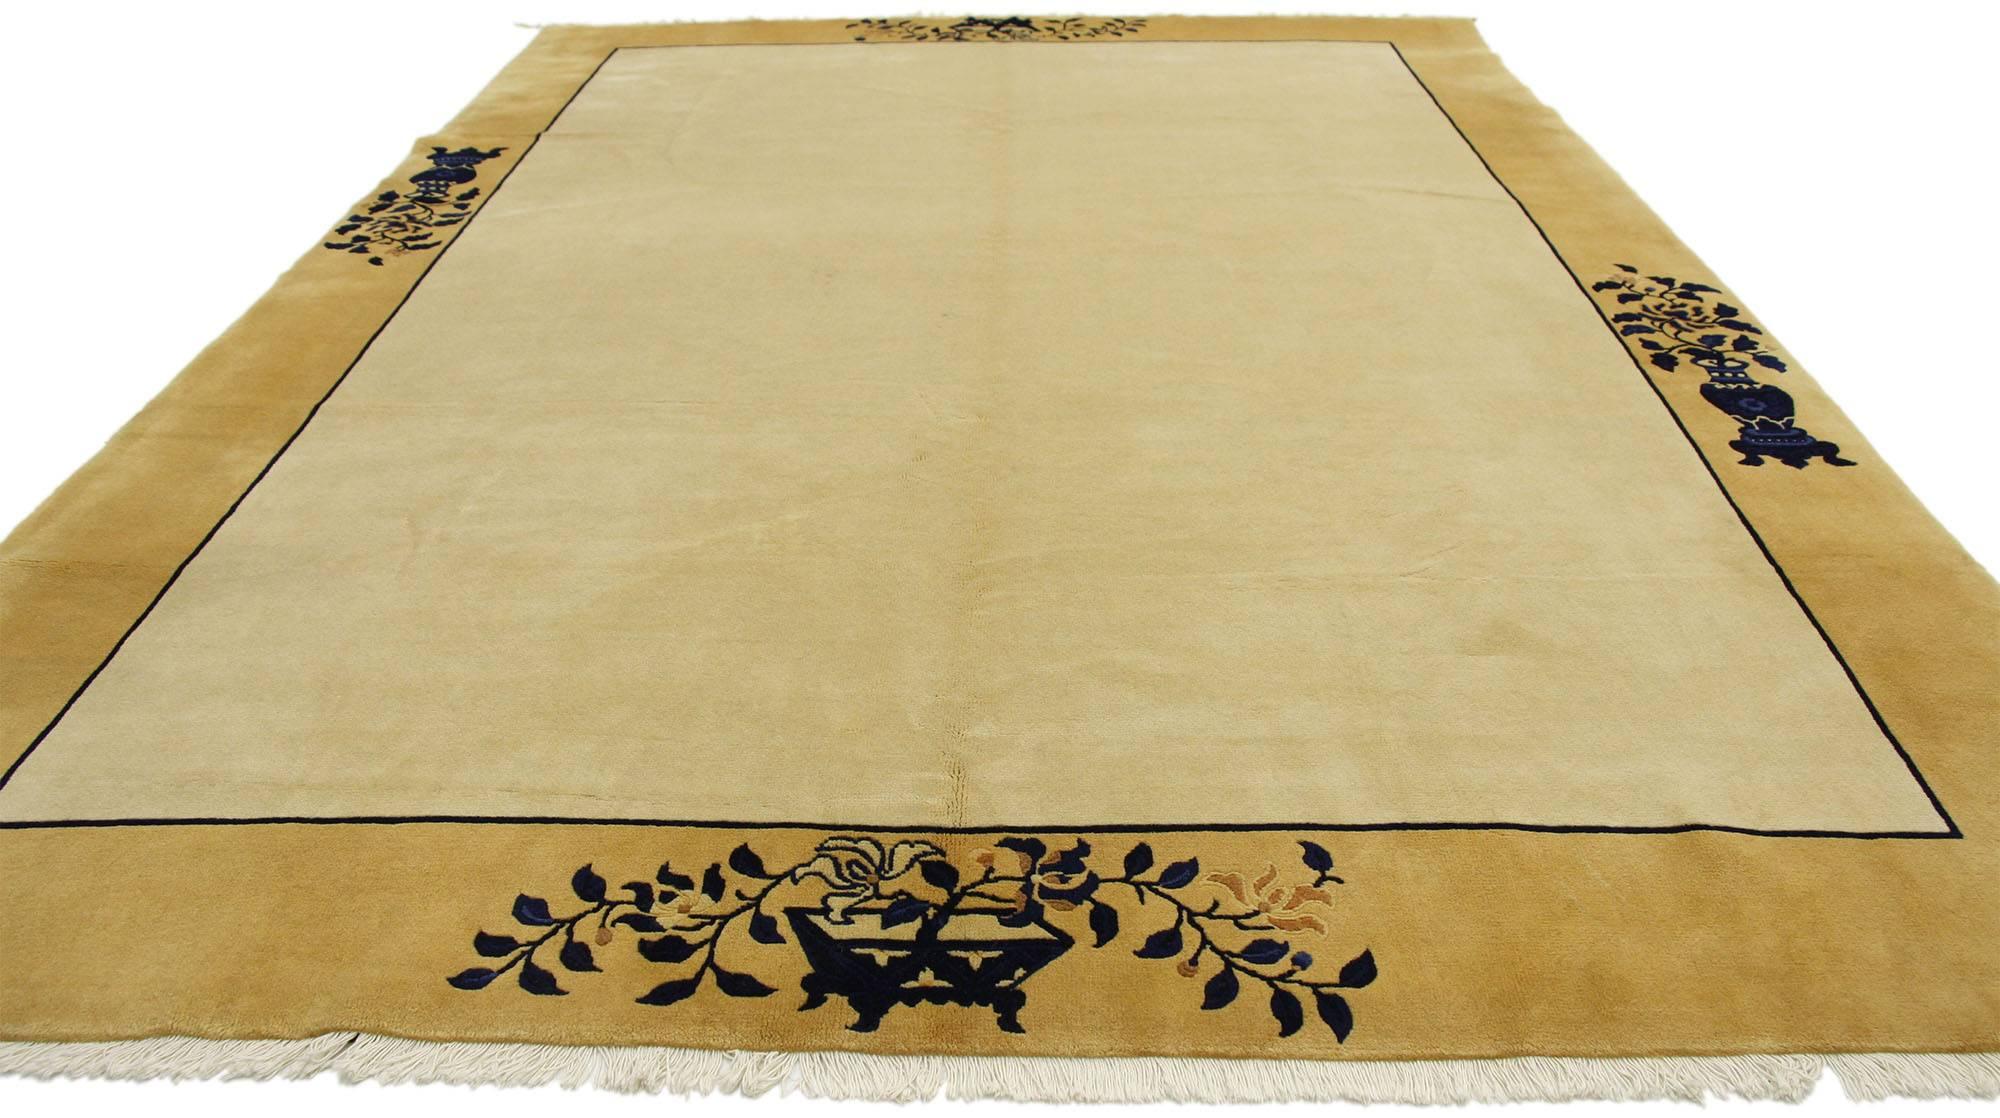 77131 Vintage Chinese Rug with Minimalist Design, Peace and Tranquility 06'10 x 09'09. This hand-knotted wool vintage Chinese rug with minimalist style is a change of pace from the jewel-tone colors typically associated with Chinese culture,